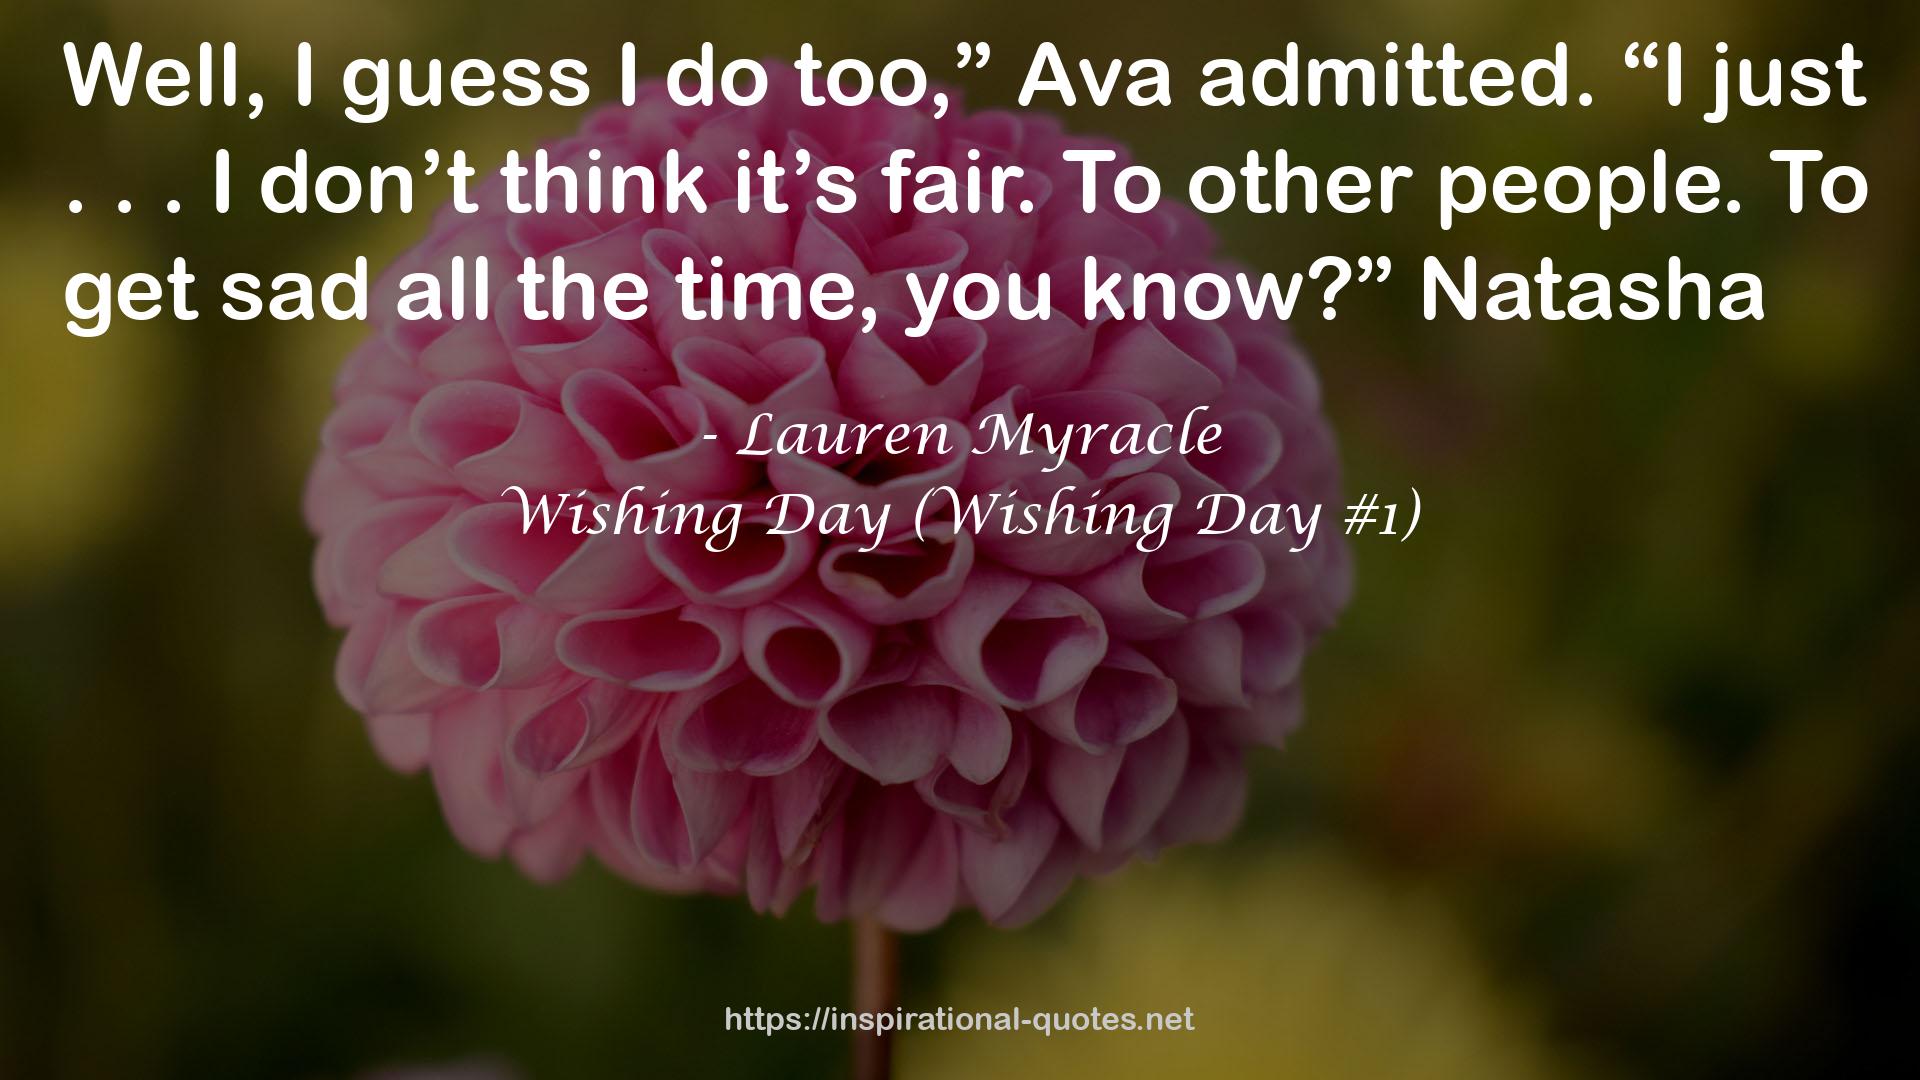 Wishing Day (Wishing Day #1) QUOTES